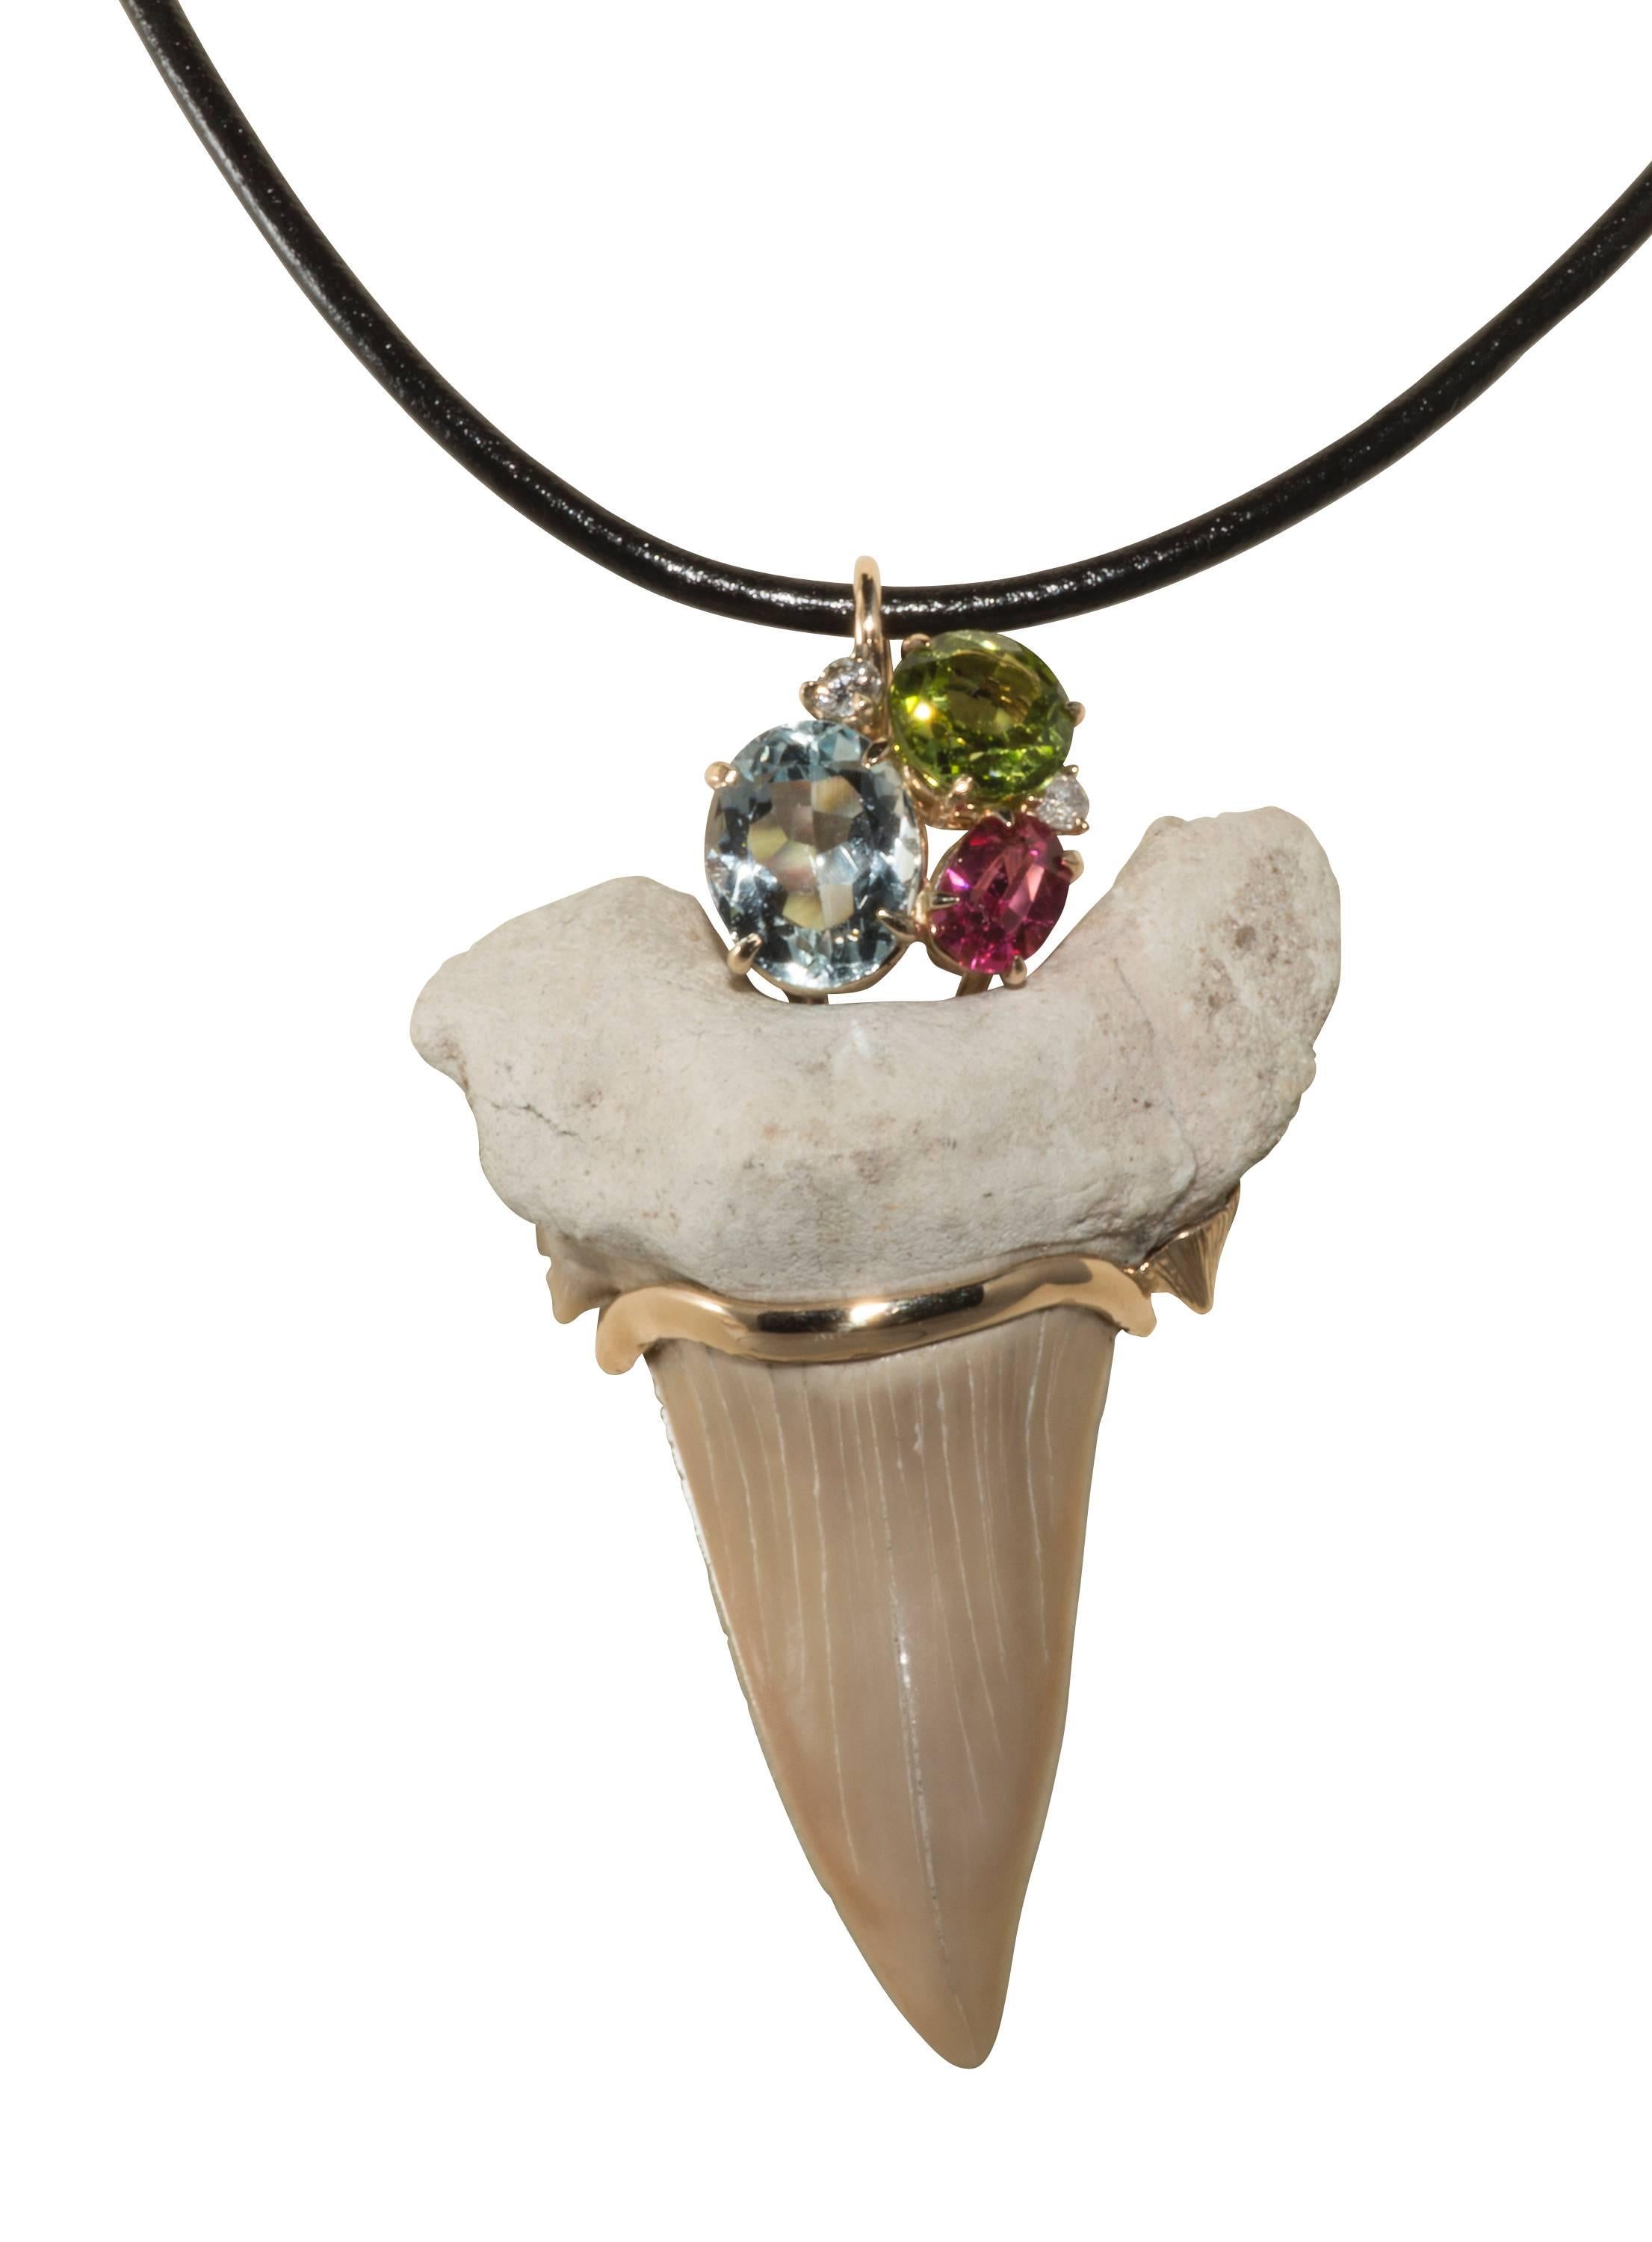 This is a very avant garde pendant made from a fossilized sharks tooth.  It has three stones consisting of an aquamarine, a peridot, a pink spinel and two small diamonds all set in 14k yellow gold.